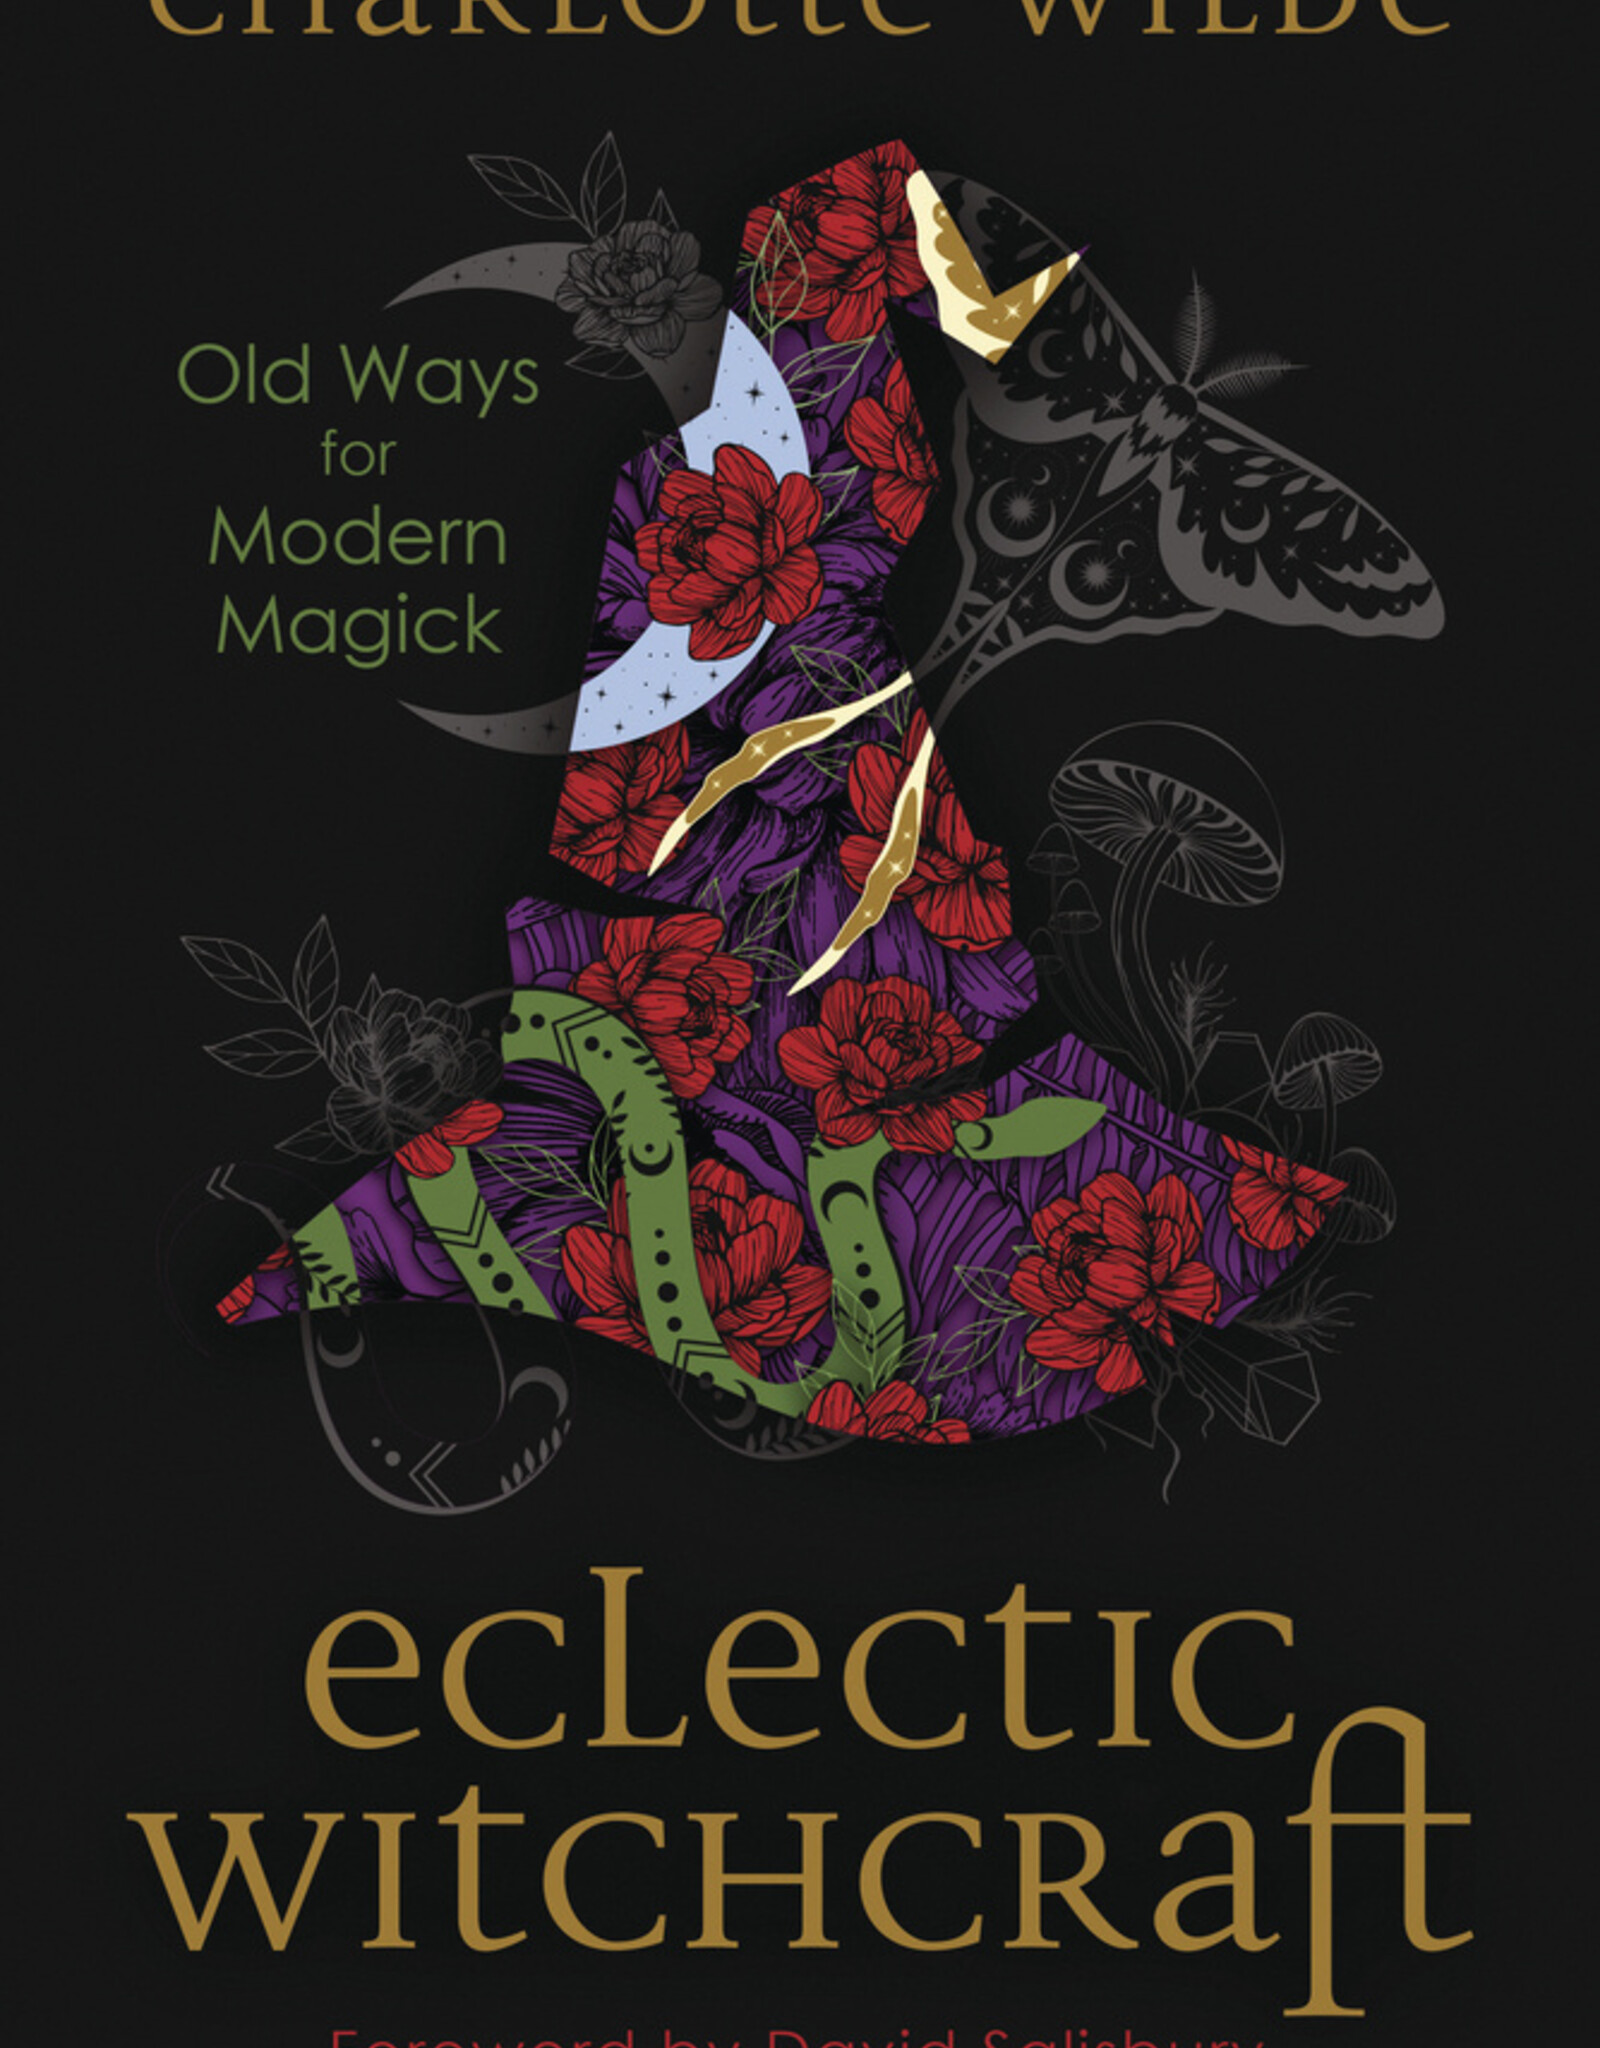 Llewelyn Eclectic Witchcraft